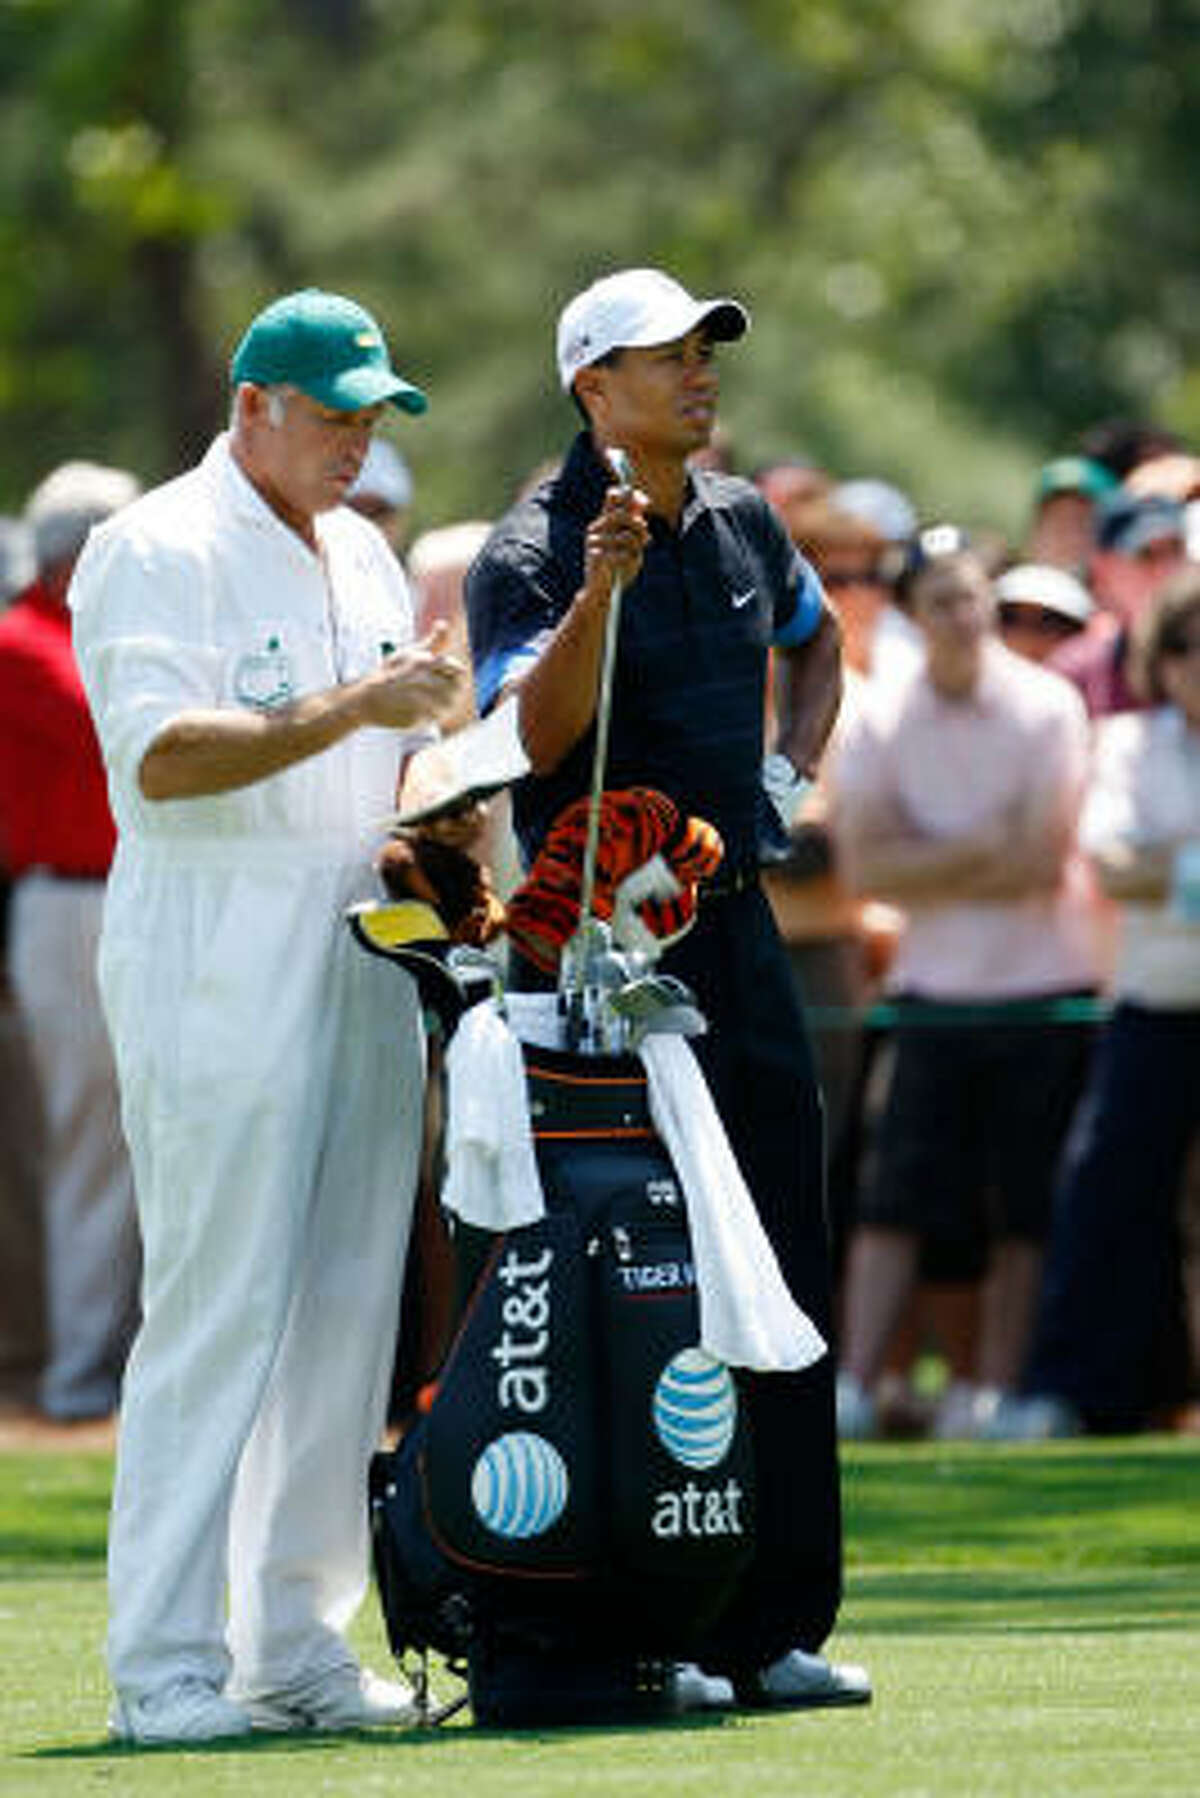 Tiger Woods waits in the first fairway as his caddie Steve Williams looks on.